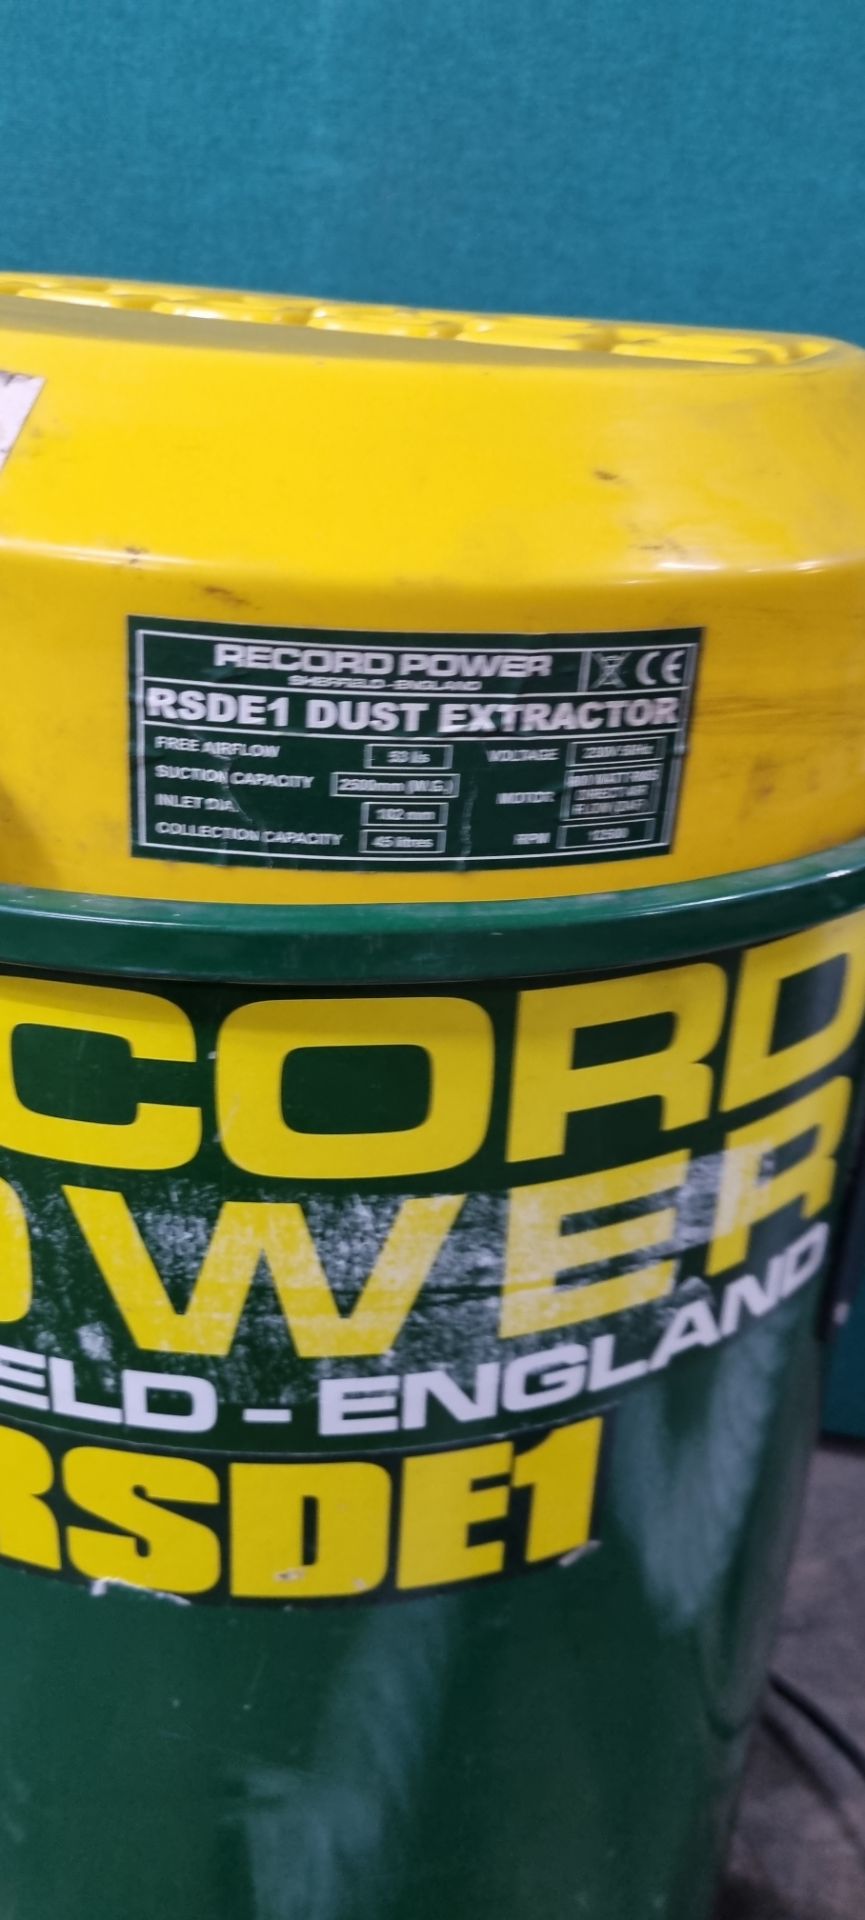 1 x Record Power RSDE1 45 Litre Dust Extractor - Image 2 of 3